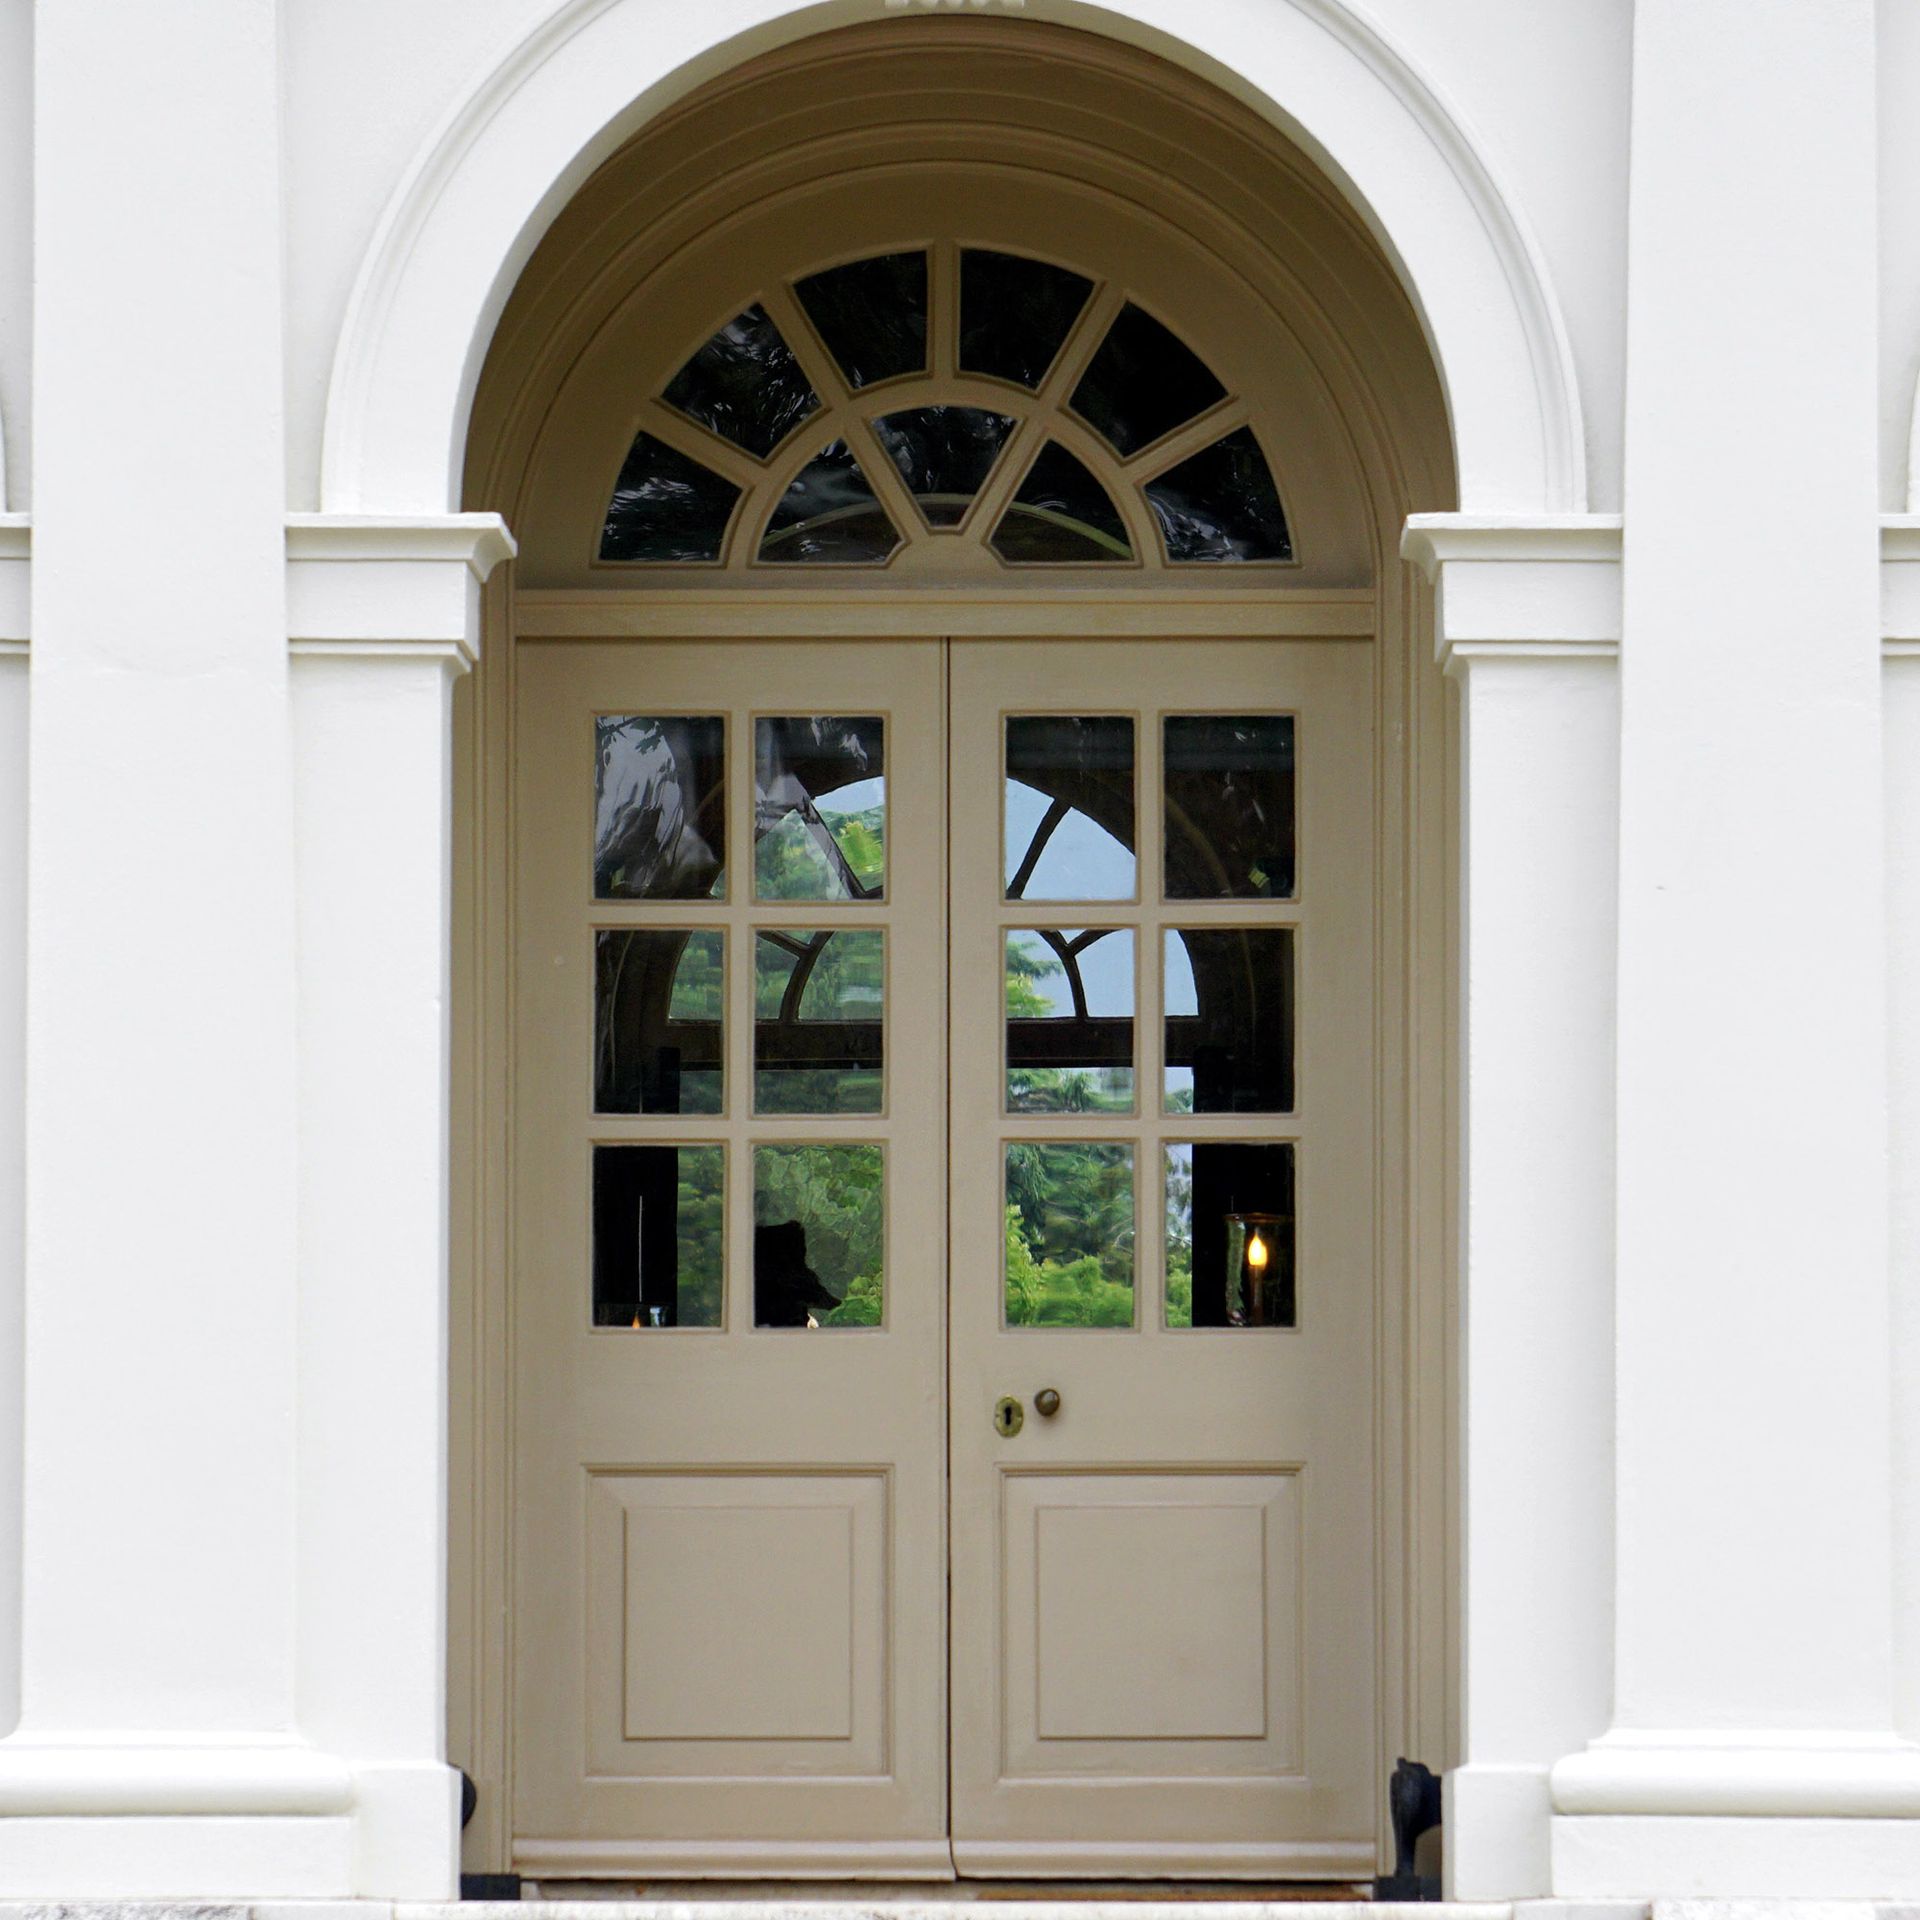 the front door of a white building with arched windows